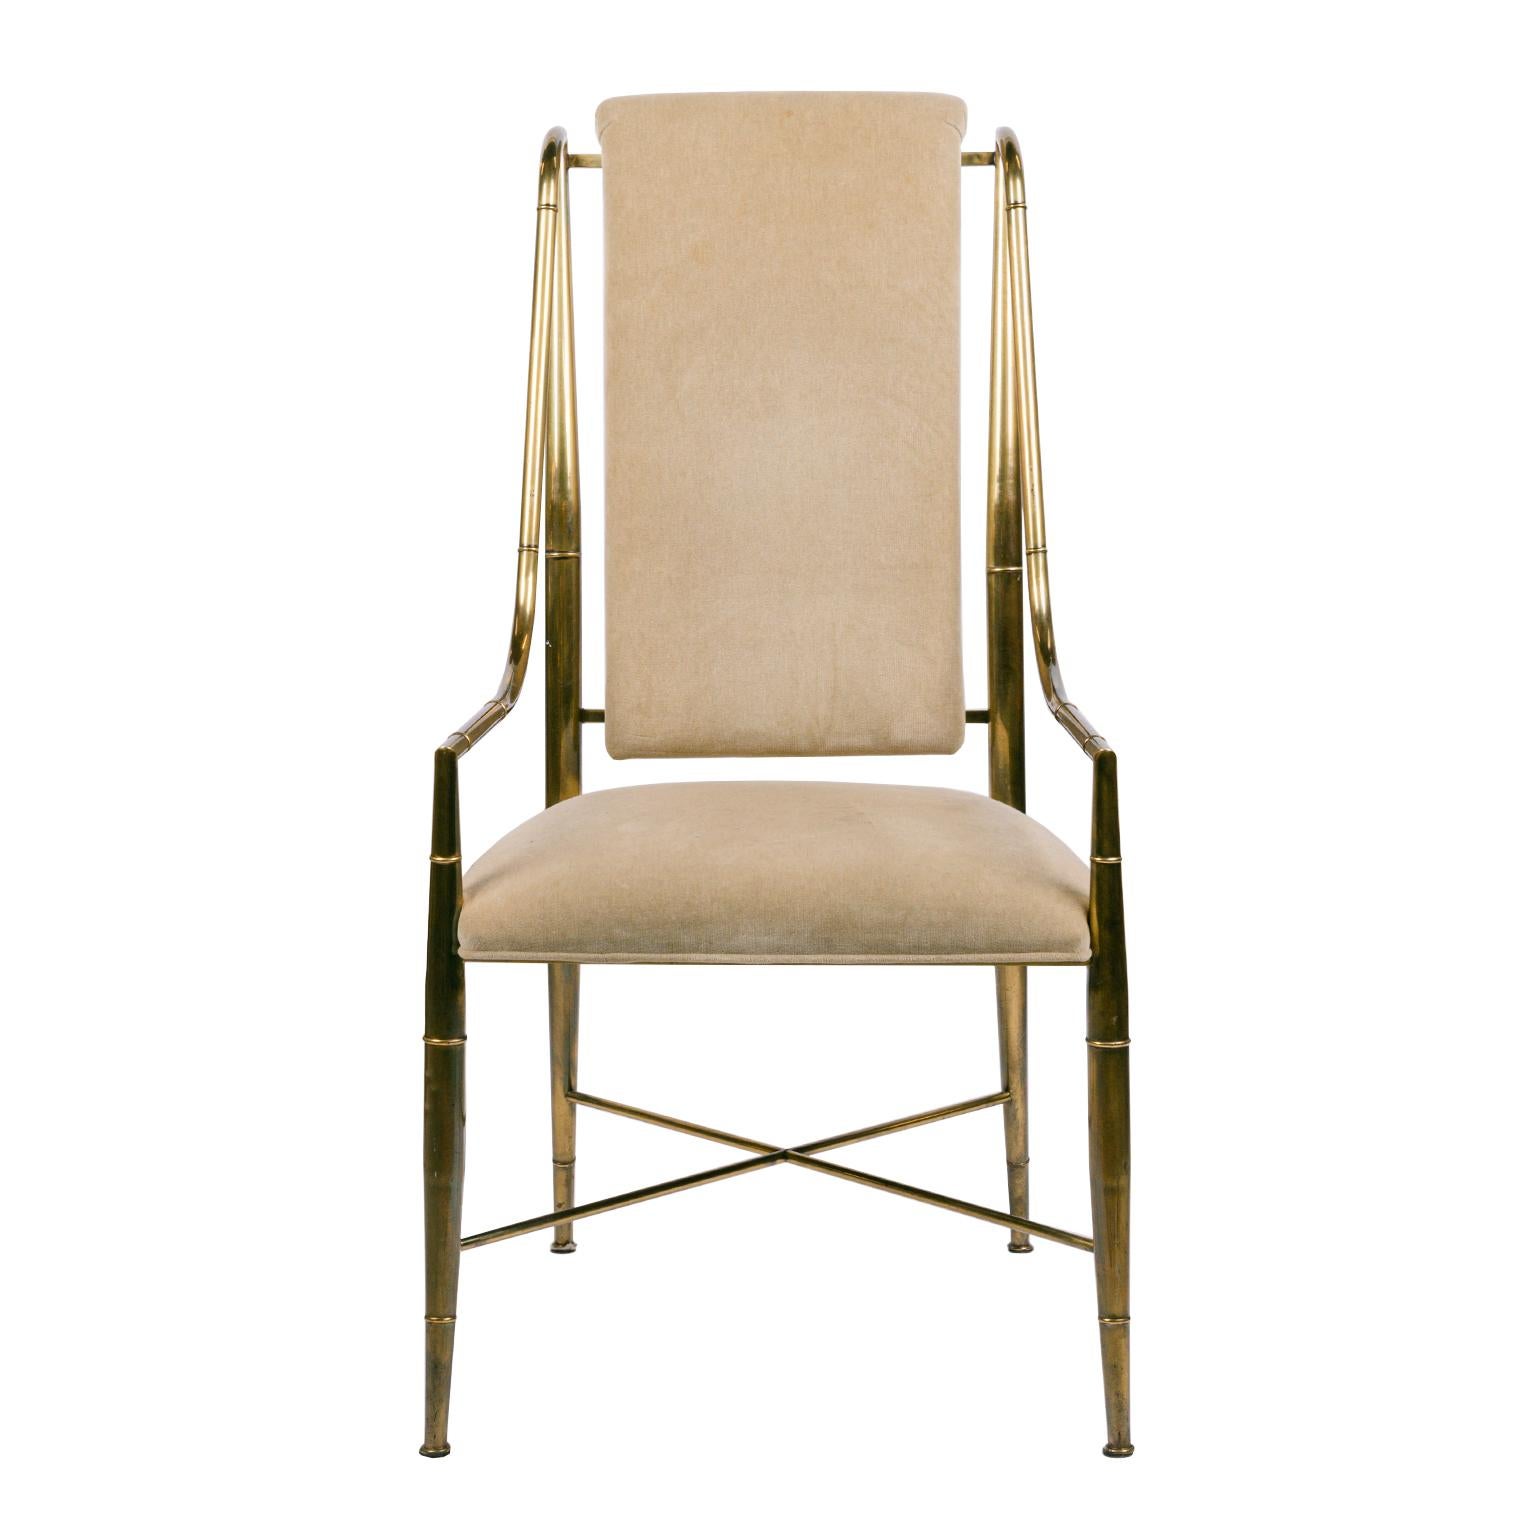 A rare set of 8 timeless solid brass faux bamboo dining chairs purchased in Montreal from the set of one of the first X-Men movies. They were re-upholstered in 8 different but complimentary colored velvet fabric by a local designer for 
a project a